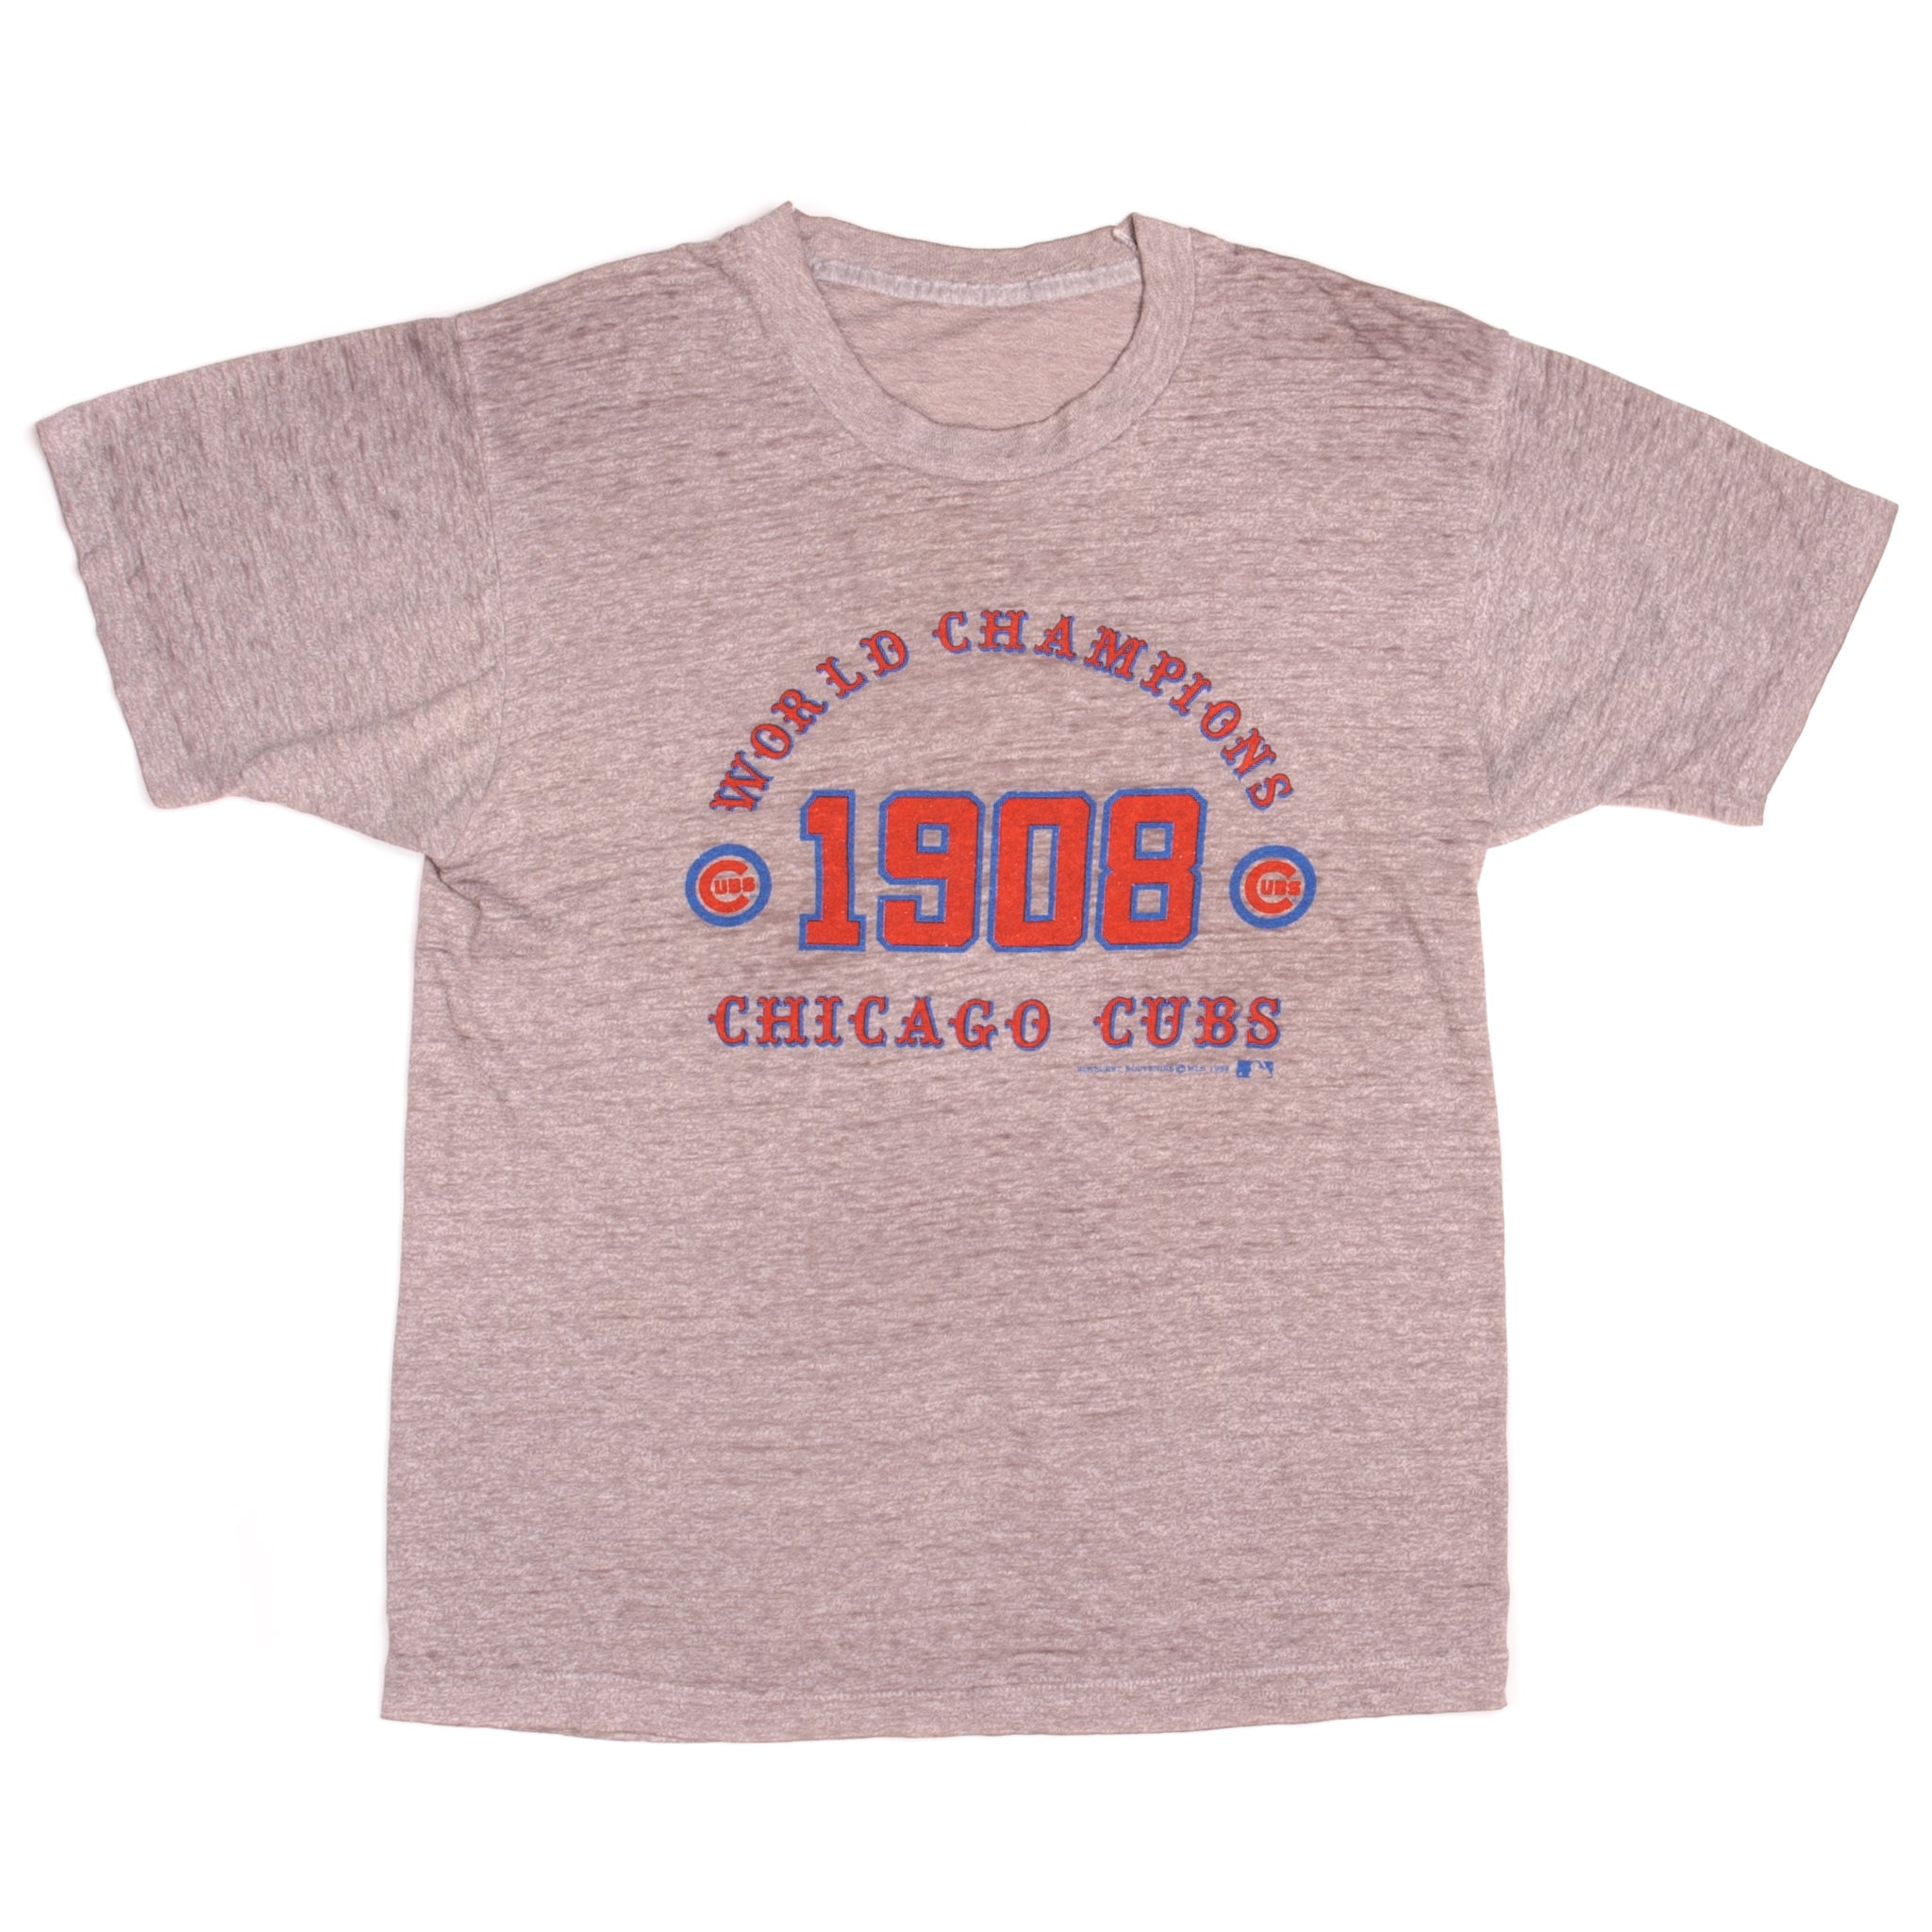 Sports / College Vintage MLB World Champions Chicago Cubs Tee Shirt 1988 Size Medium Made in USA